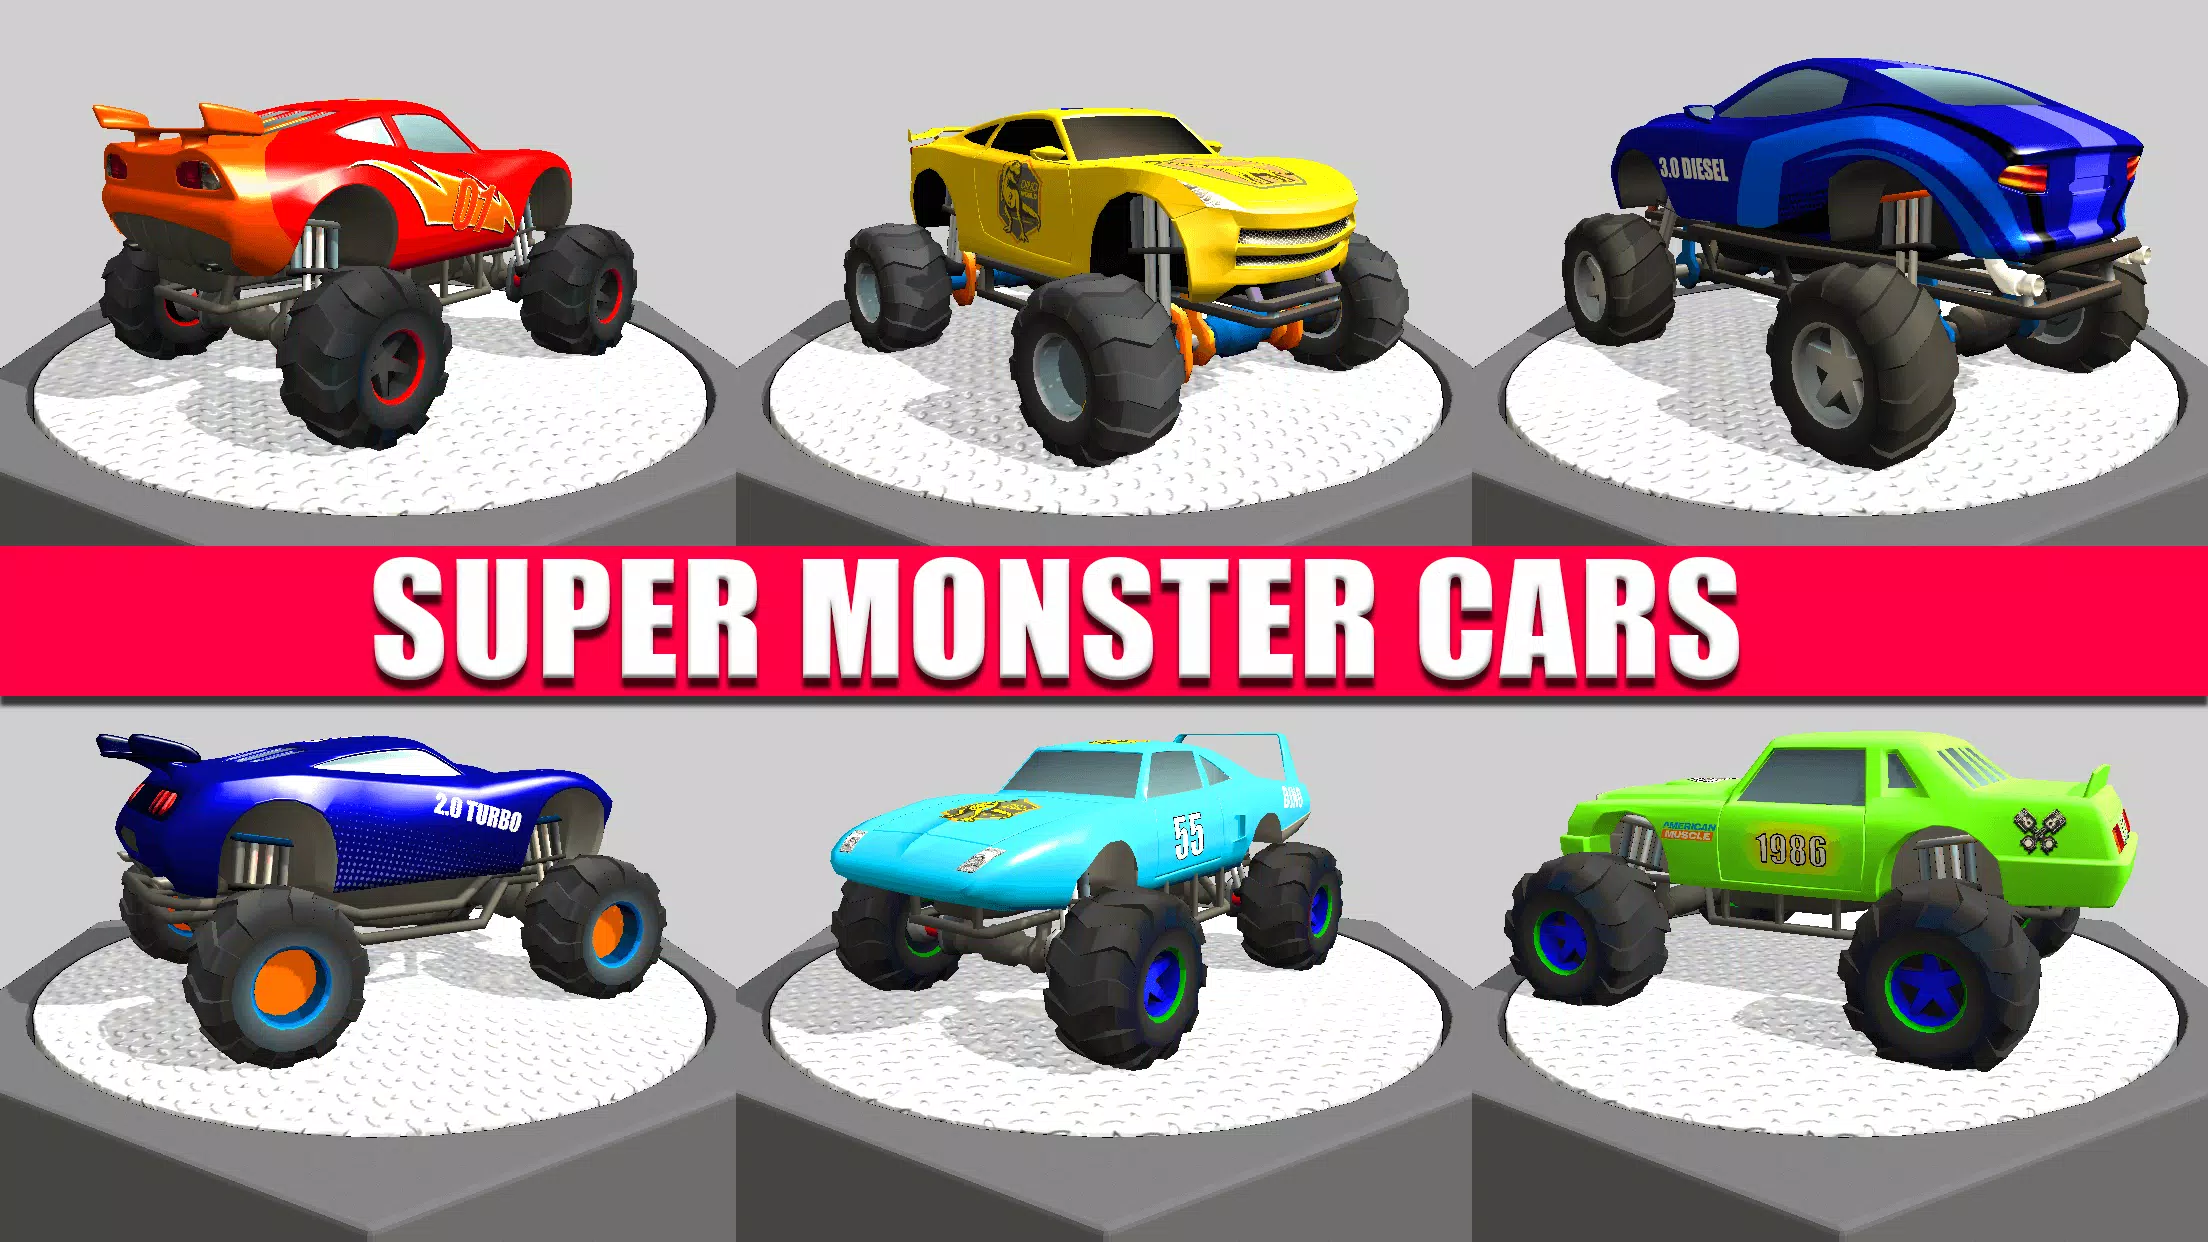 Monster Truck Ramp Jump Saga for Android - Download the APK from